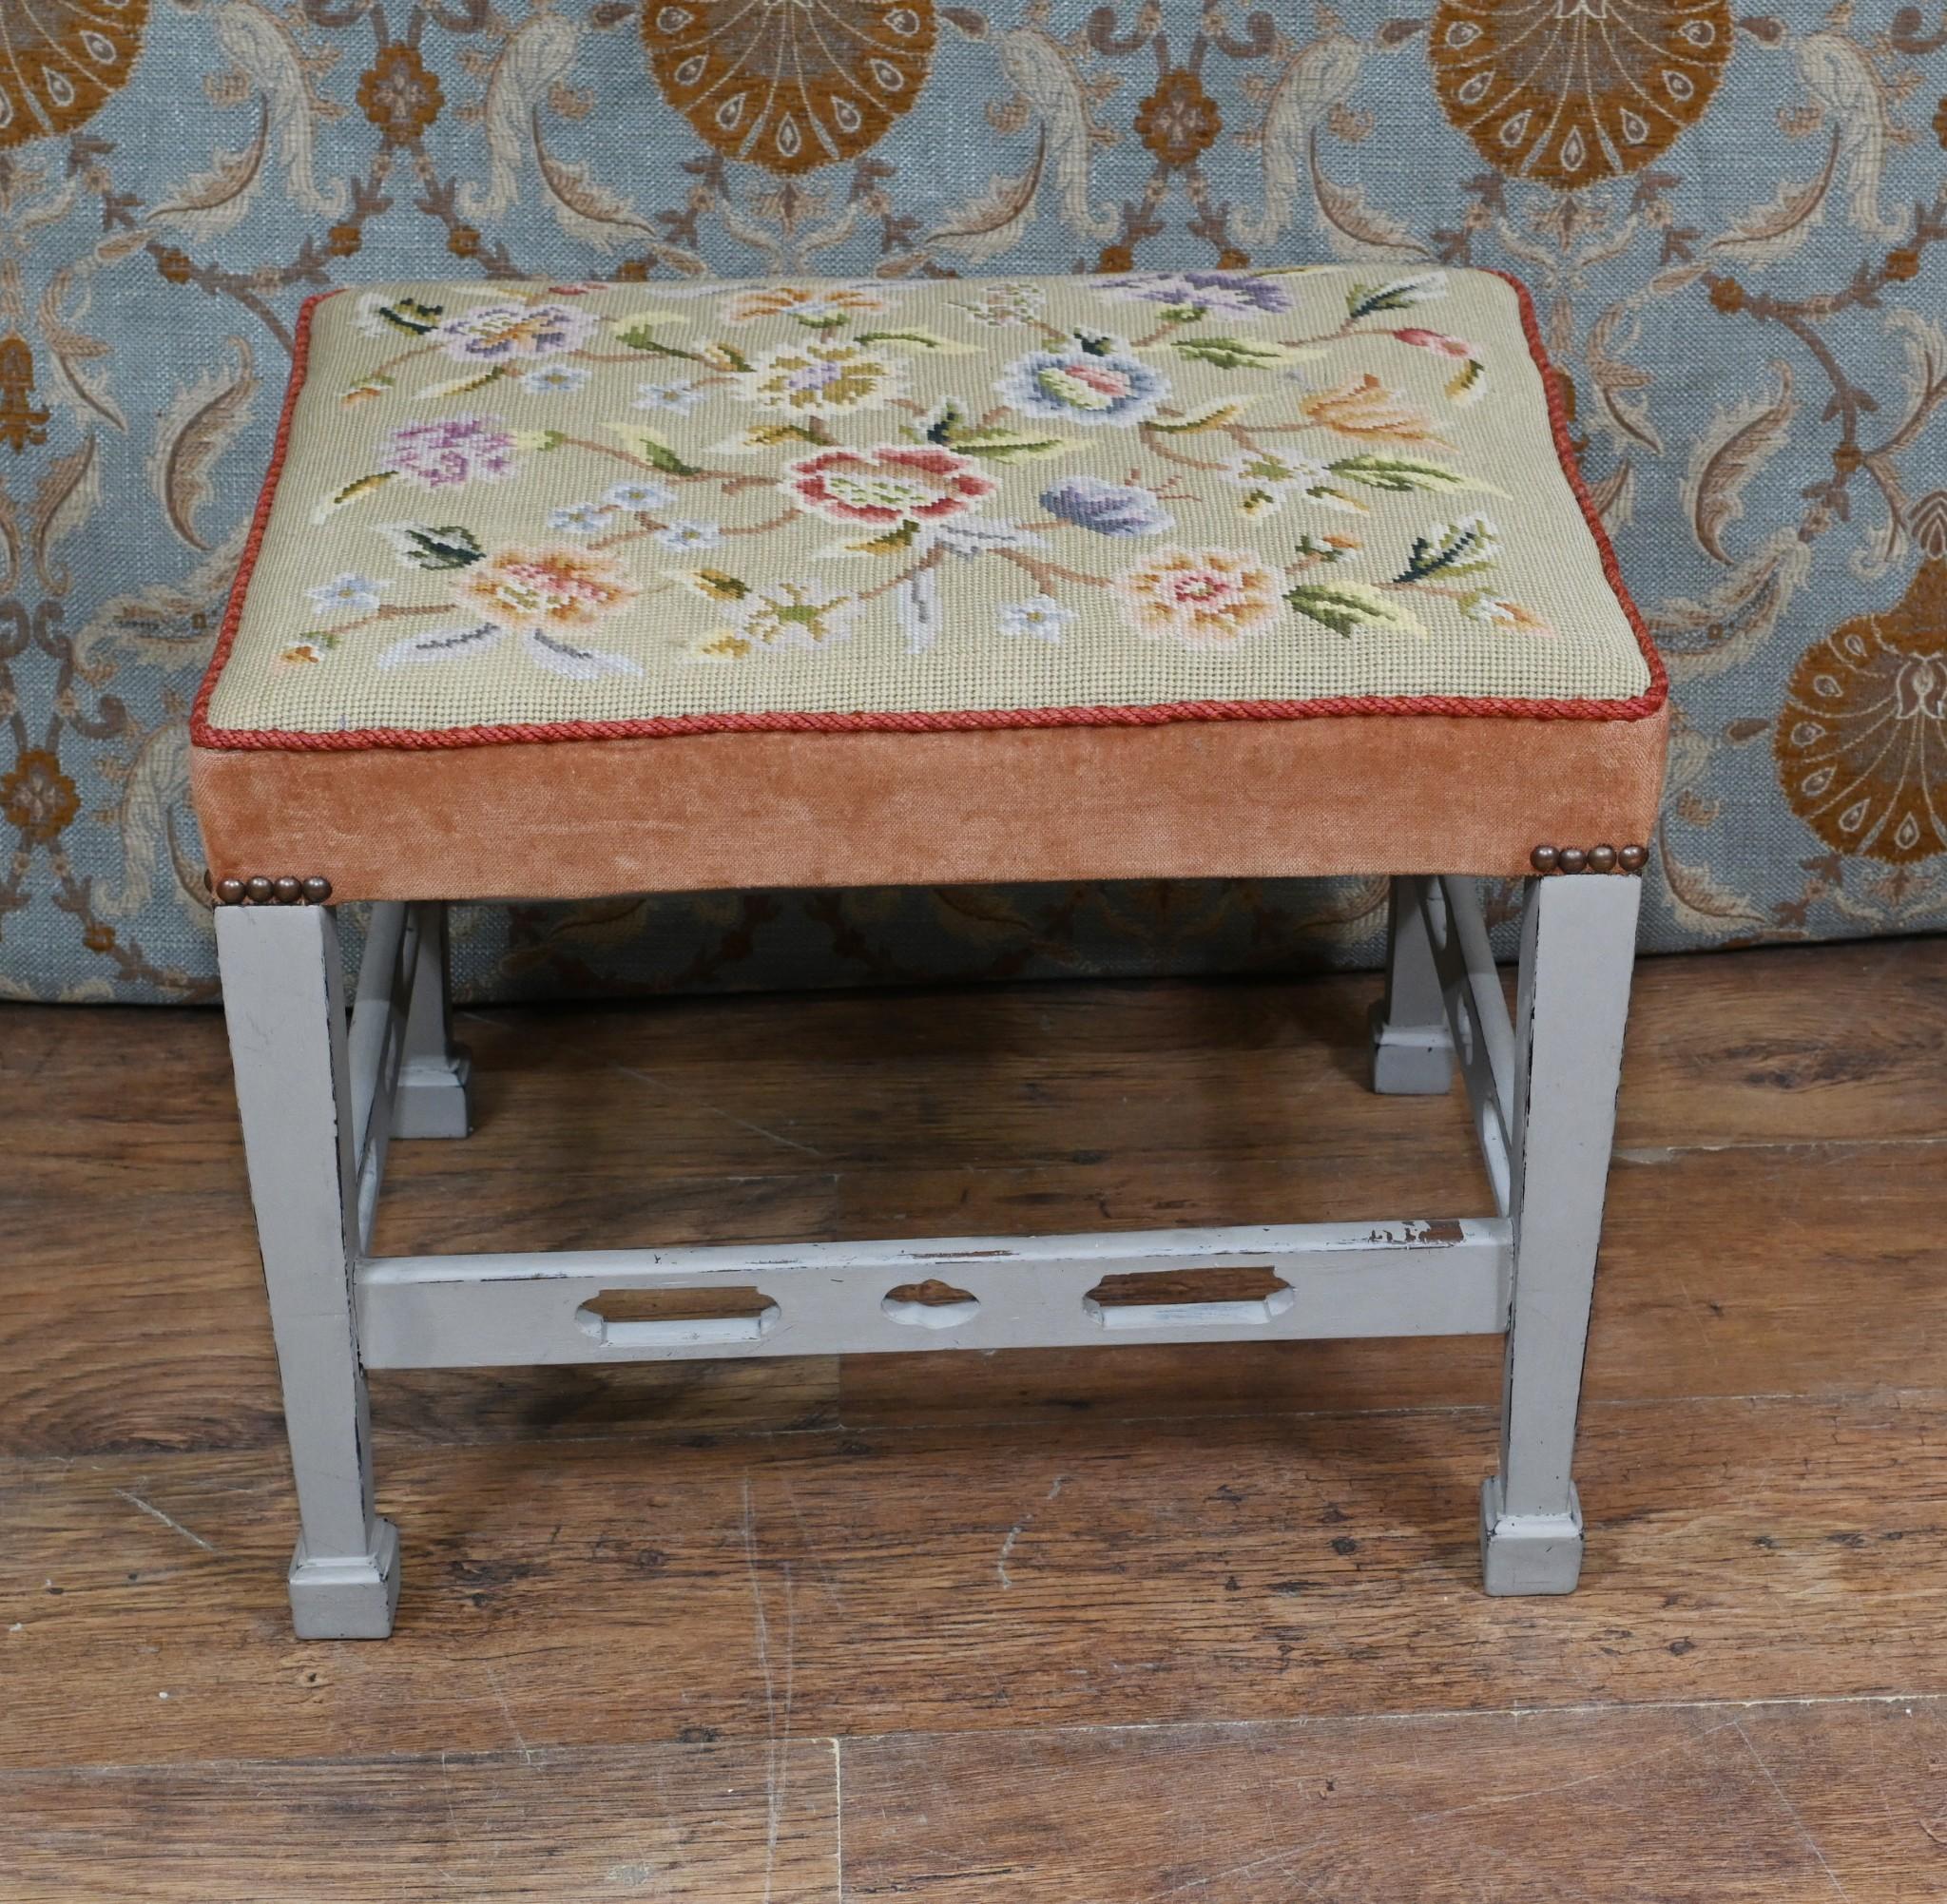 Painted Edwardian Stool Tapestry Needlepoint In Good Condition For Sale In Potters Bar, GB